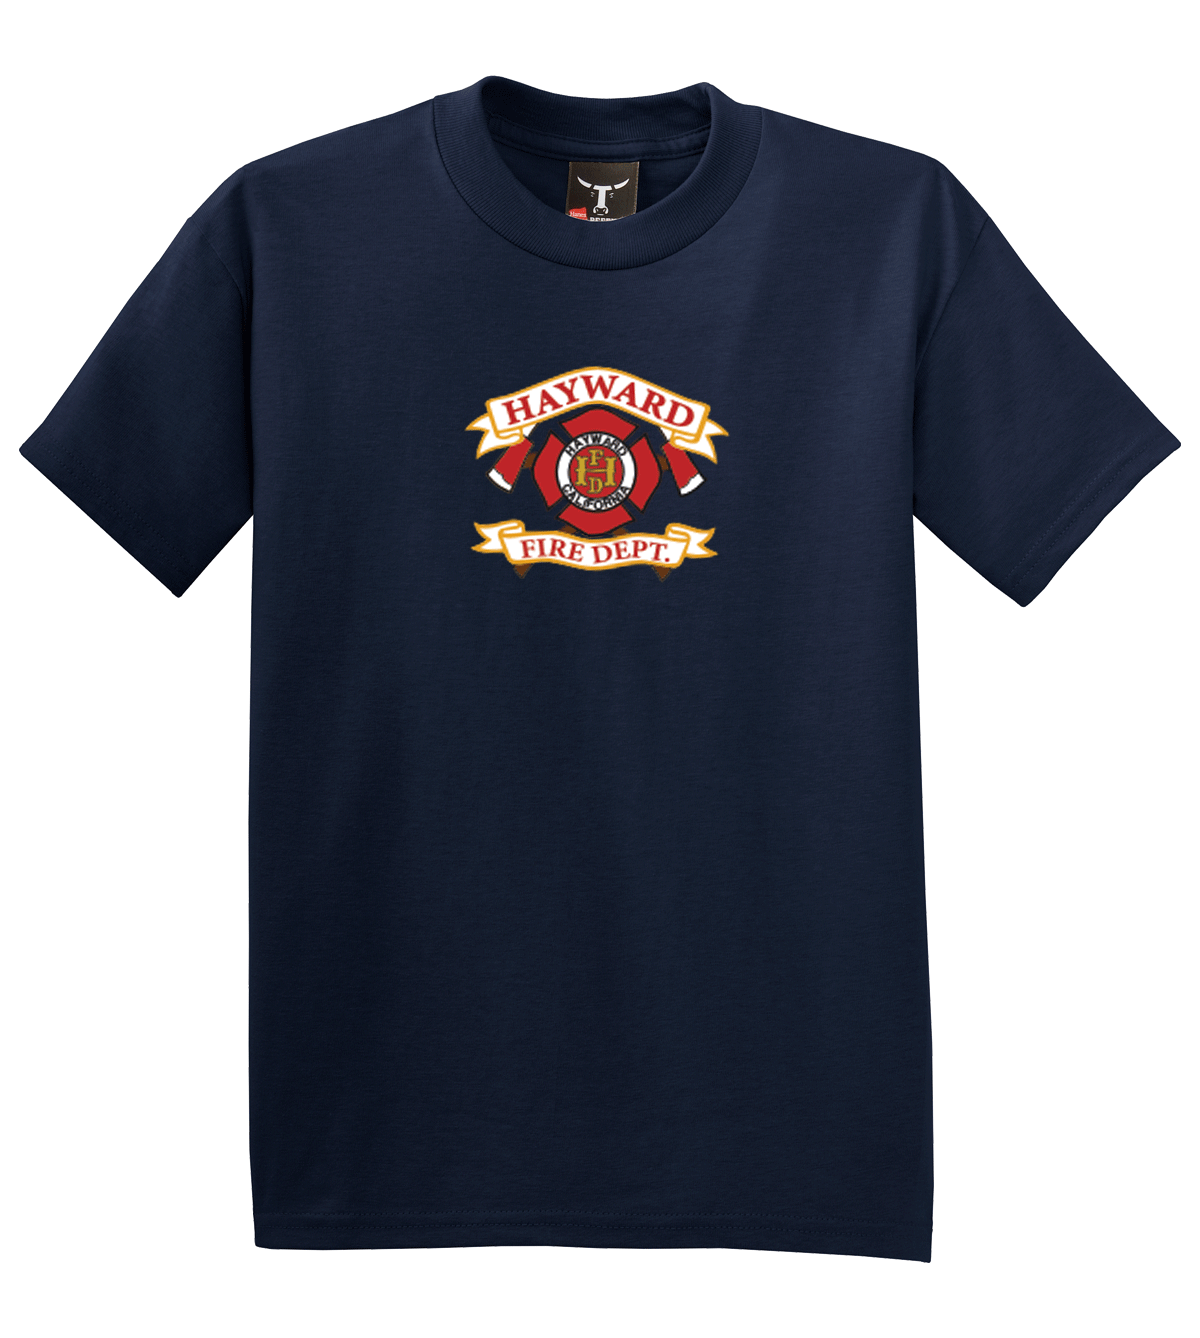 Hayward Firefighters Company Store | distinctiverecognition.com